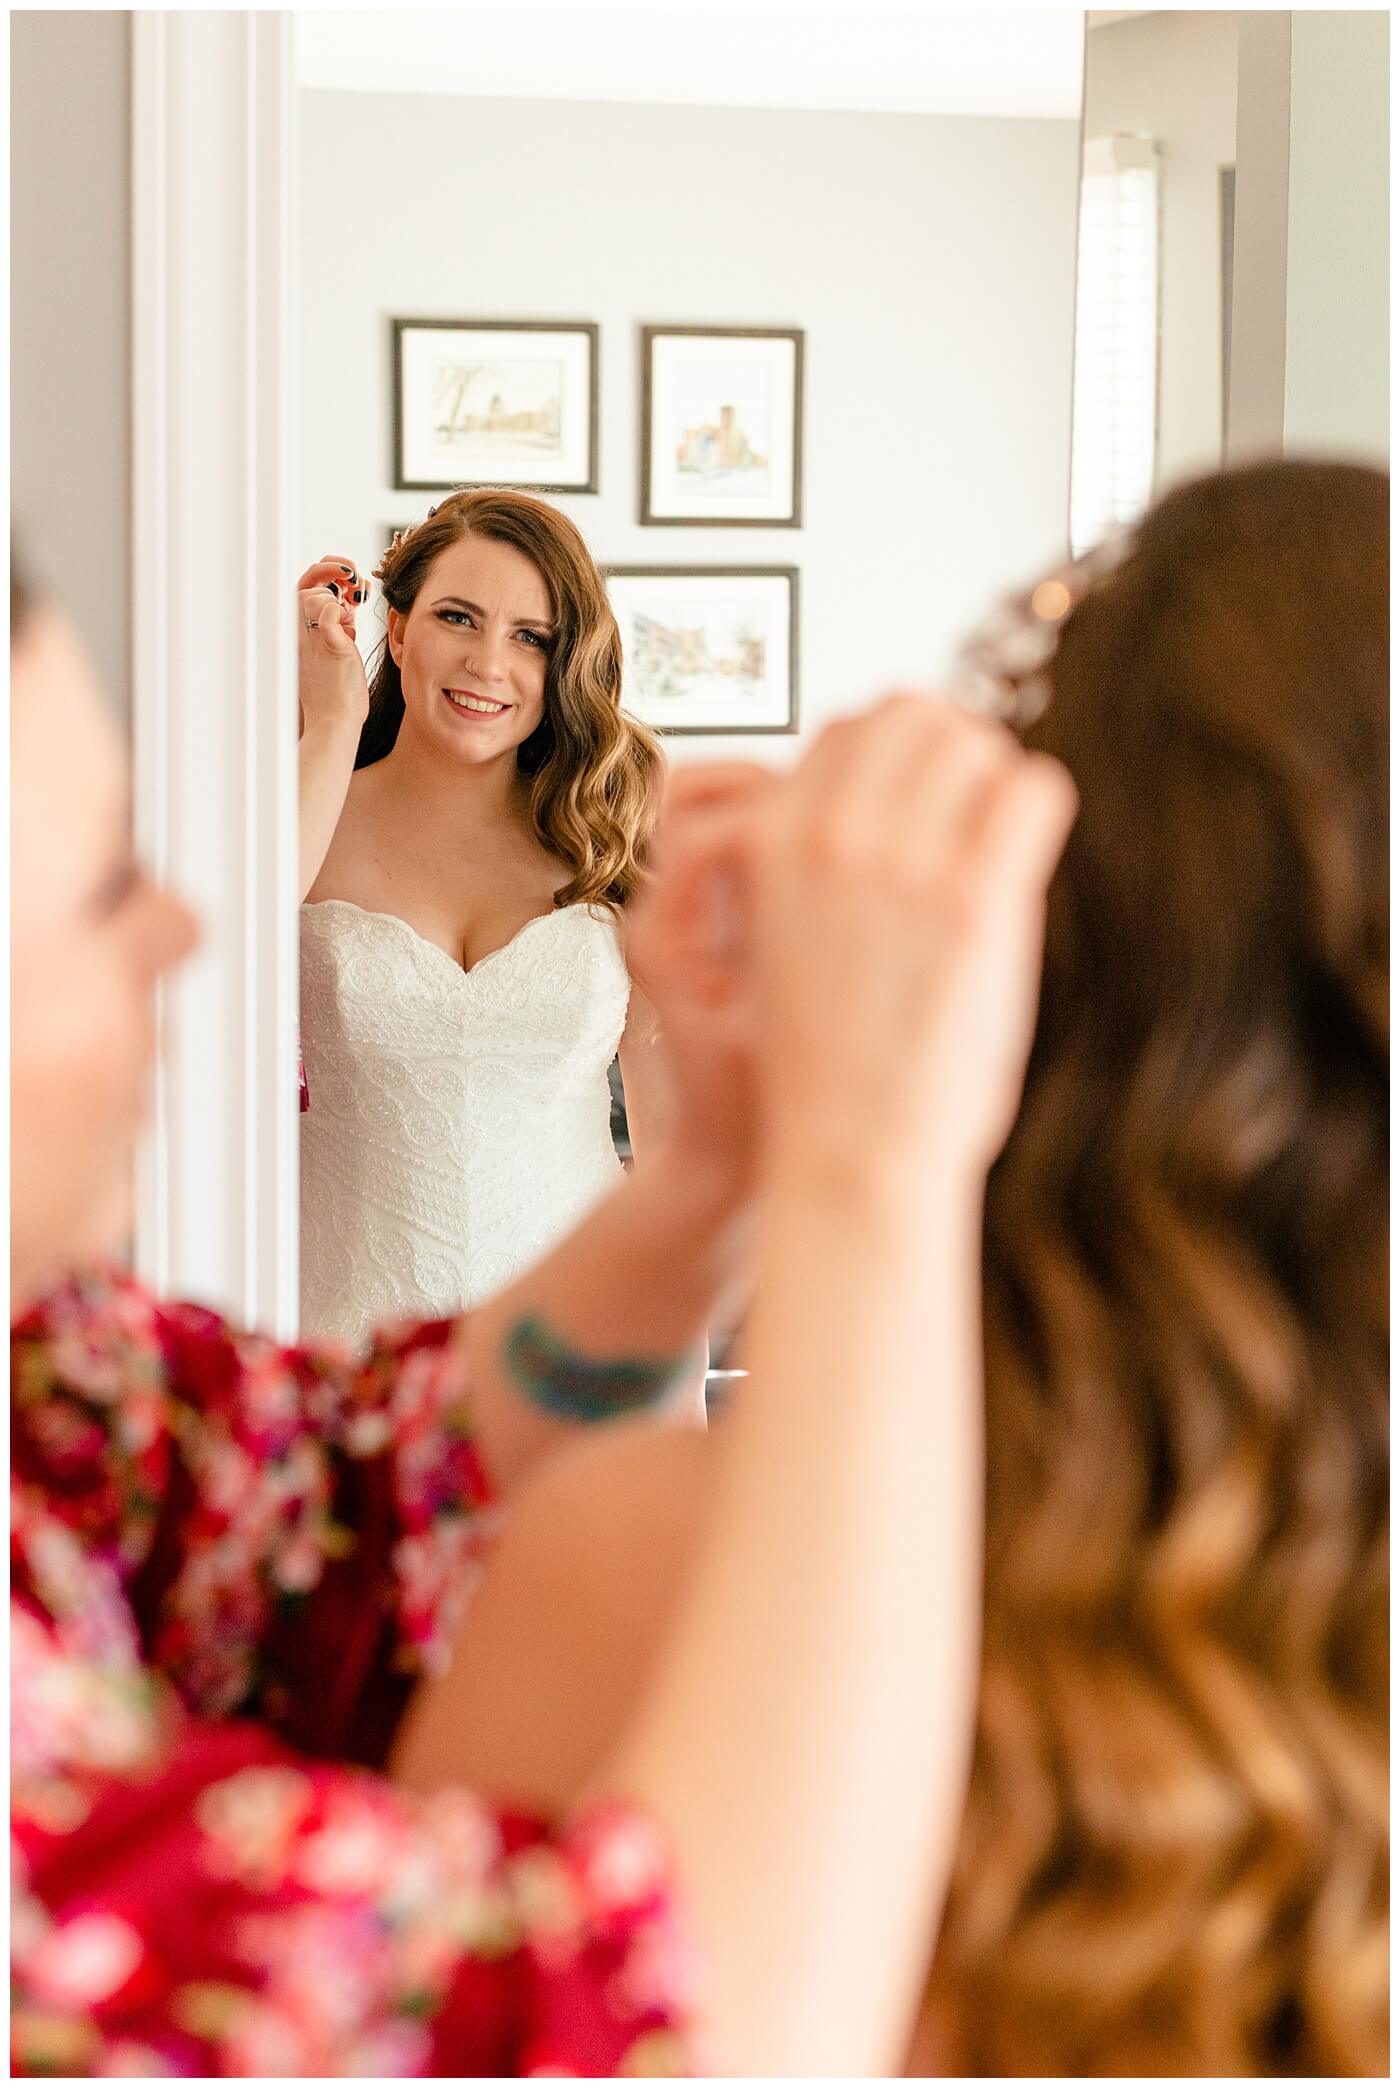 Regina Wedding Photographer - Tim & Jennelle At Home Wedding - Bride final touches with hair clip